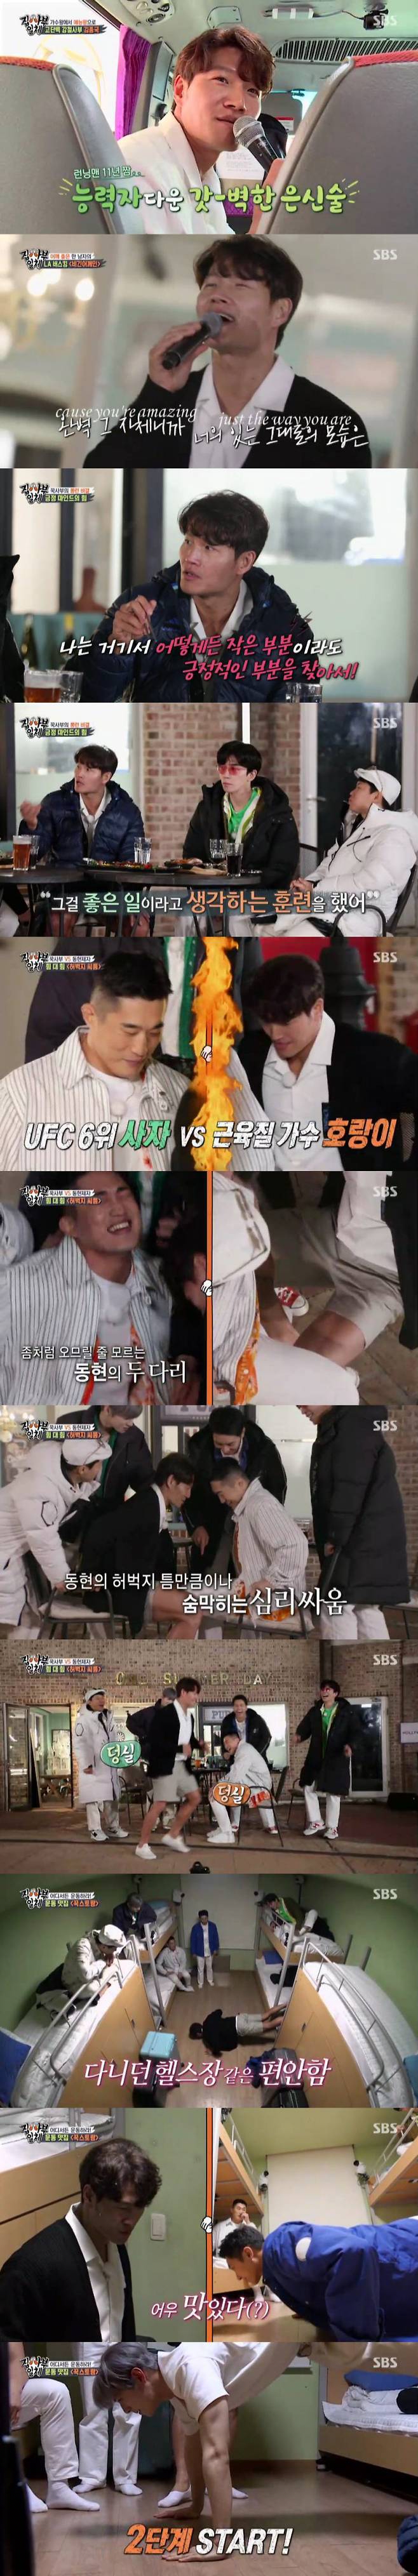 In SBS All The Butlers, the Icon of Power master Kim Jong-kook and Kim Dong-Hyun won the Best One Minute with the fun of watching.On this day, Kim Jong-kook appeared as a master, and he was shown a special trip with All The Butlers Lee Seung-gi, Yang Se-hyeong, Shin Sung Rok, Cha Eun Woo and Kim Dong-Hyun.Members climbed on a chartered bus prepared by the master while wearing a vacation look.The bus is decorated like a plane, from windows to announcements, so that members can feel the feeling of actually traveling.Then, Master Kim Jong-kook made a surprise appearance and cheered the members by singing One man and There is a master, I love you so much.Kim Jong-kook said, Todays destination is LA, and said he prepared a surrogate satisfaction trip for viewers who could not travel.Since then, Kim Jong-kook and members have arrived in English village in Paju, Gyeonggi Province. Members have entered Saboud rather than Hollywood and started a special trip.Kim Jong-kook said, How much did you speak English? He said, I studied English in full.Kim Jong-kook said, I always carried my mother on my trip.I was so anxious and disliked that I could not speak English because I was in a disadvantaged and dangerous situation when I was with my mother. Kim Jong-kook, who has been doing SBS Sunday 9pm Drama entertainment for 18 years from X Man to Family Out and Running Man.Kim Jong-kook said, Thank you very much. When asked about the secret of Long Run for decades, he said, If you try to do well, youre unhappy.If you think you are losing money and concessions, you are just happy. I am so happy now. If something negative happens, Ive trained myself to find some positive part of it, even a small part of it, and think its a good thing, he said, stressing a positive attitude.Lee Seung-gi said, The other thing is positive, but why is it when we lose the game? He mentioned the wrestling match between Kim Jong-kook and Kim Dong-Hyun five years ago.Kim Jong-kook and Kim Dong-Hyuns thigh wrestling revenge match was unfolded.Kim Dong-Hyun was helplessly defeated and laughed at Kim Jong-kooks time difference attack, while the two men were tense and nervous before the start.On this day, the fierce pride battle between Kim Jong-kook, a talented person in the power-to-power entertainment world, and Kim Dong-Hyun, a UFC legend, caught the attention of viewers and won the best one minute with 6.3% of the audience rating per minute.Kim Jong-kook, who returned to the hostel after that, said, When I go to LA, I tear it before bed.I see the terrain of the hostel wherever I go, he said.Kim Jong-kook then pulled up the stairs with Lee Yong and gave an admiration.Lee Seung-gi, who watched this, laughed, saying, I did not make you do that stairs, and Is muscle so necessary in real life?Starting with Lee Seung-gi, the members also challenged the push-up.Kim Jong-kook, who was giving exercise tips to members, laughed at the members by admiring them as delicious instead of good.Yang Se-hyeong tried to quit the exercise, saying, Is it salty? But the members laughed because they did not let him go, saying Lets eat dessert.SBS All The Butlers is broadcast every Sunday 9pm Drama at 6:25 pm.